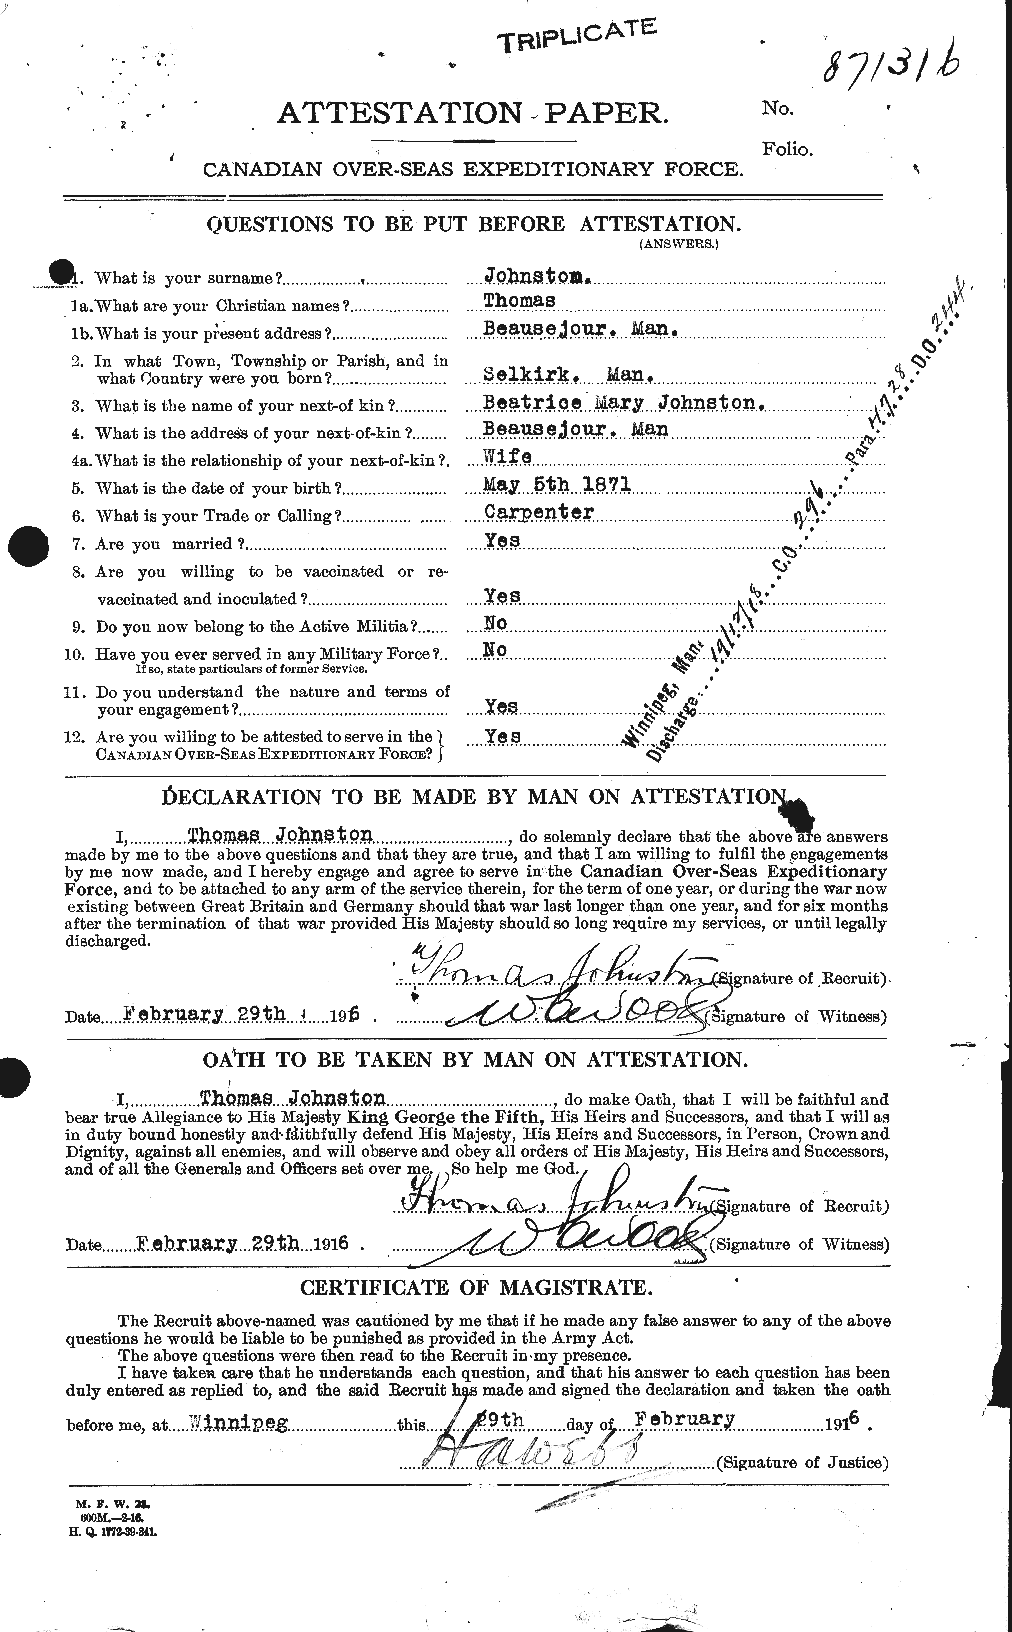 Personnel Records of the First World War - CEF 427140a